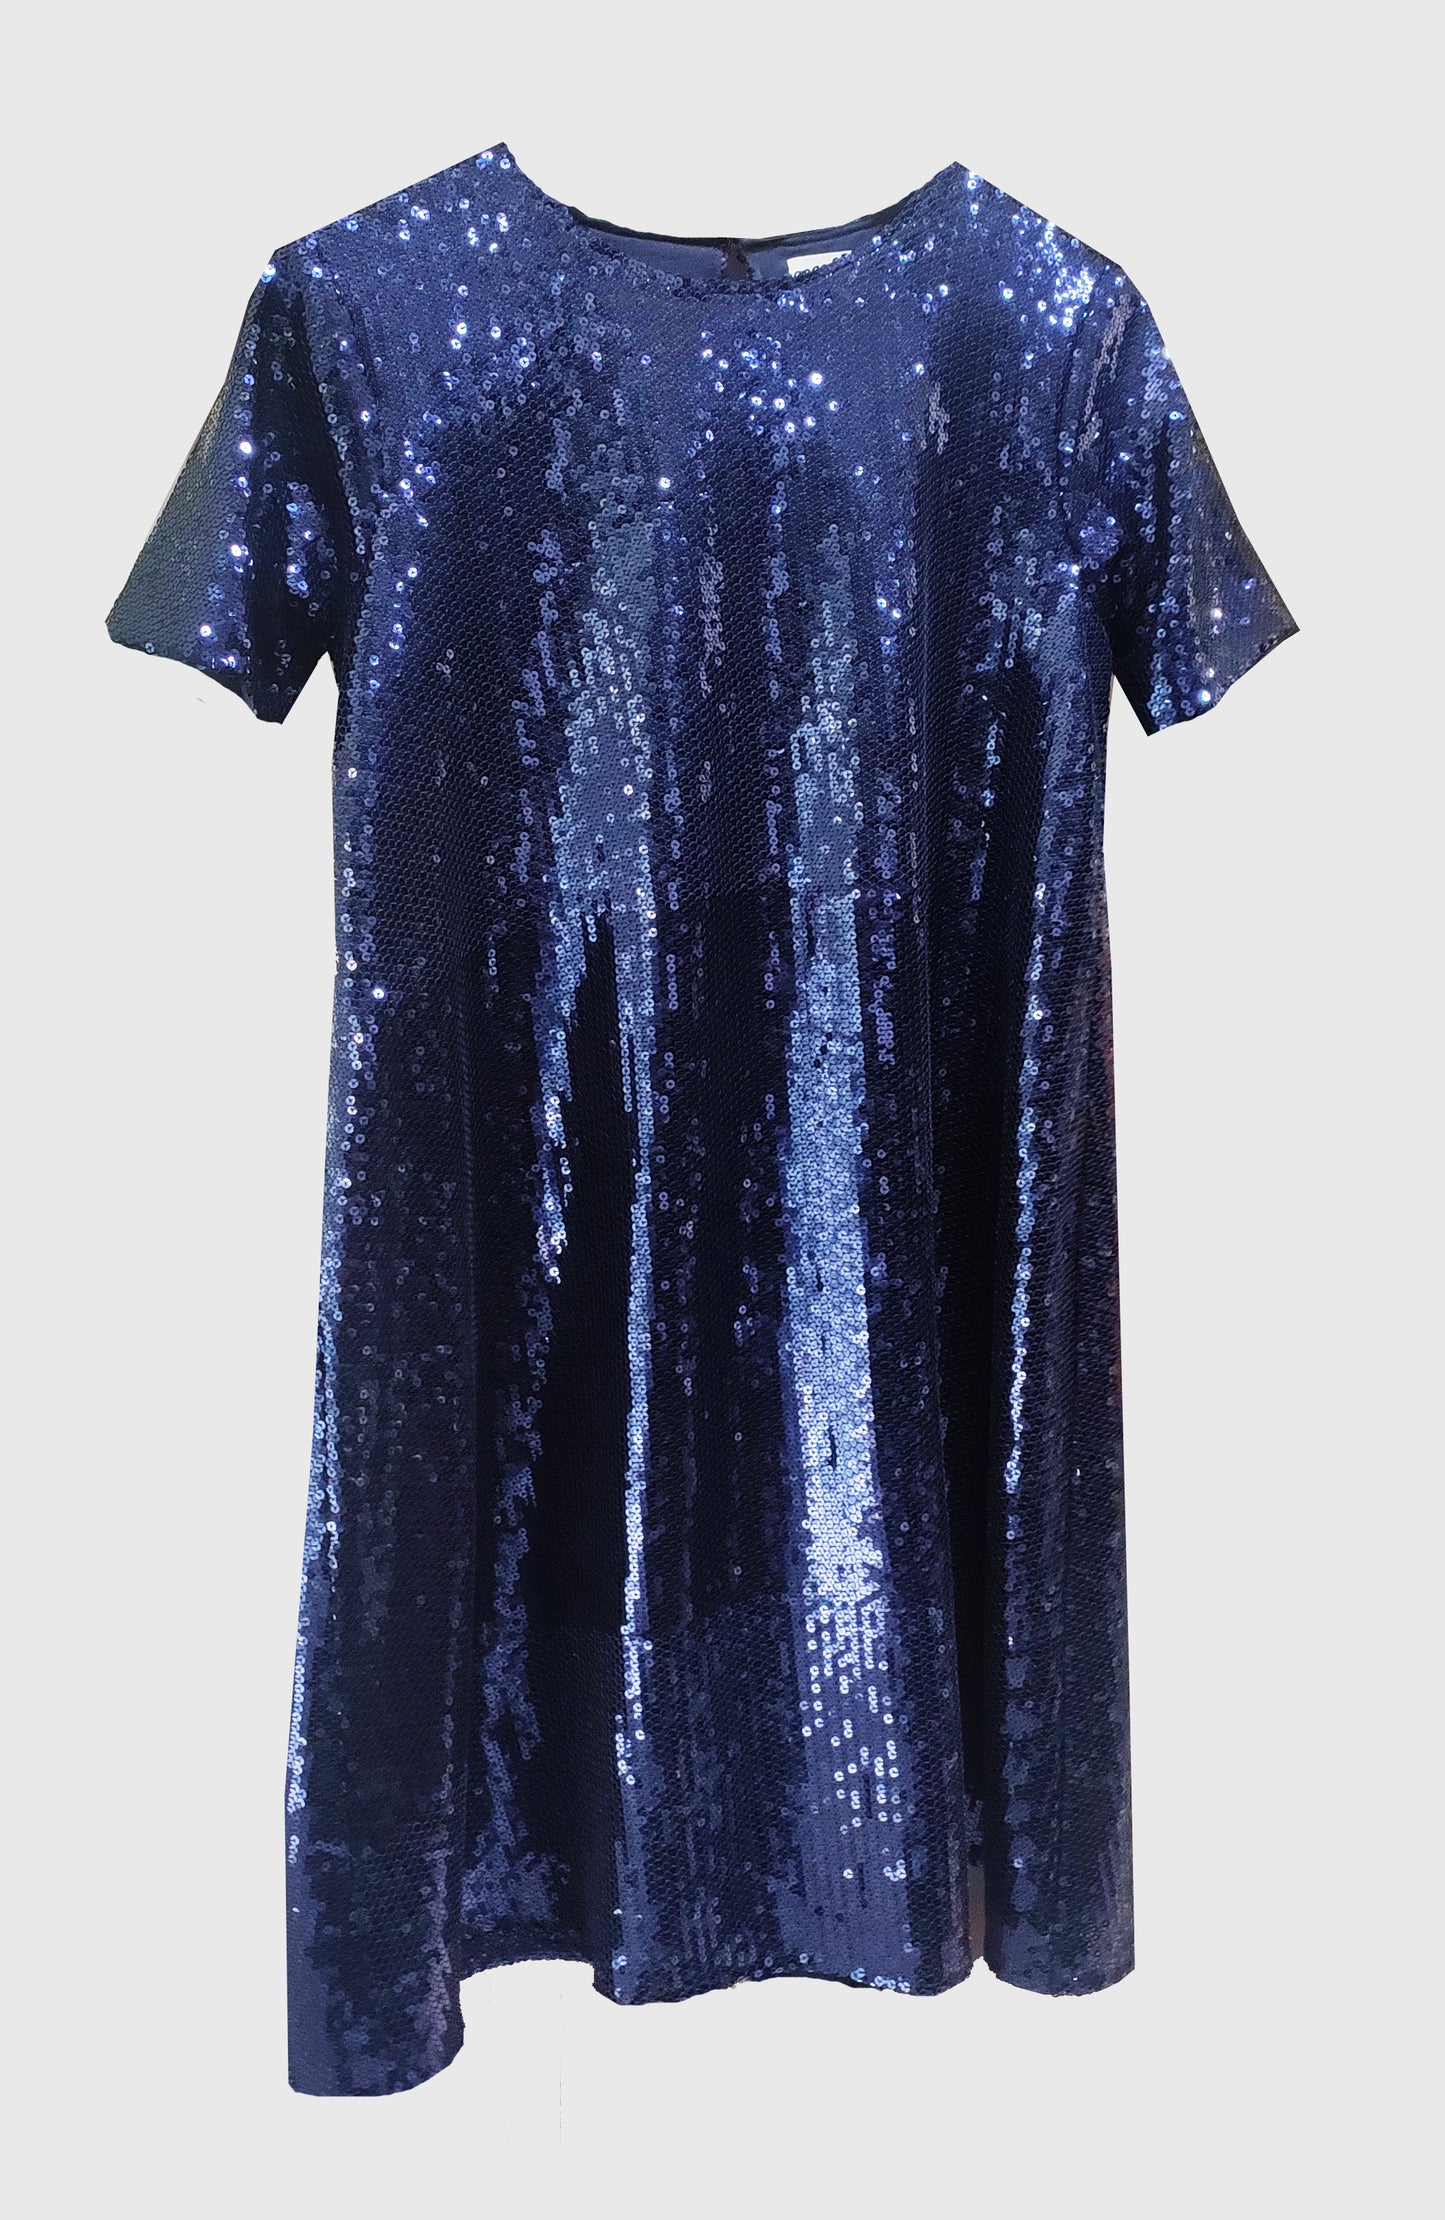 ULTRA GLAM NAVY BLUE SEQUINNED DRESS WITH A ROUND NECKLINE,SHORT SLEEVES AND A BUTTONED  OPENING AT THE BACK